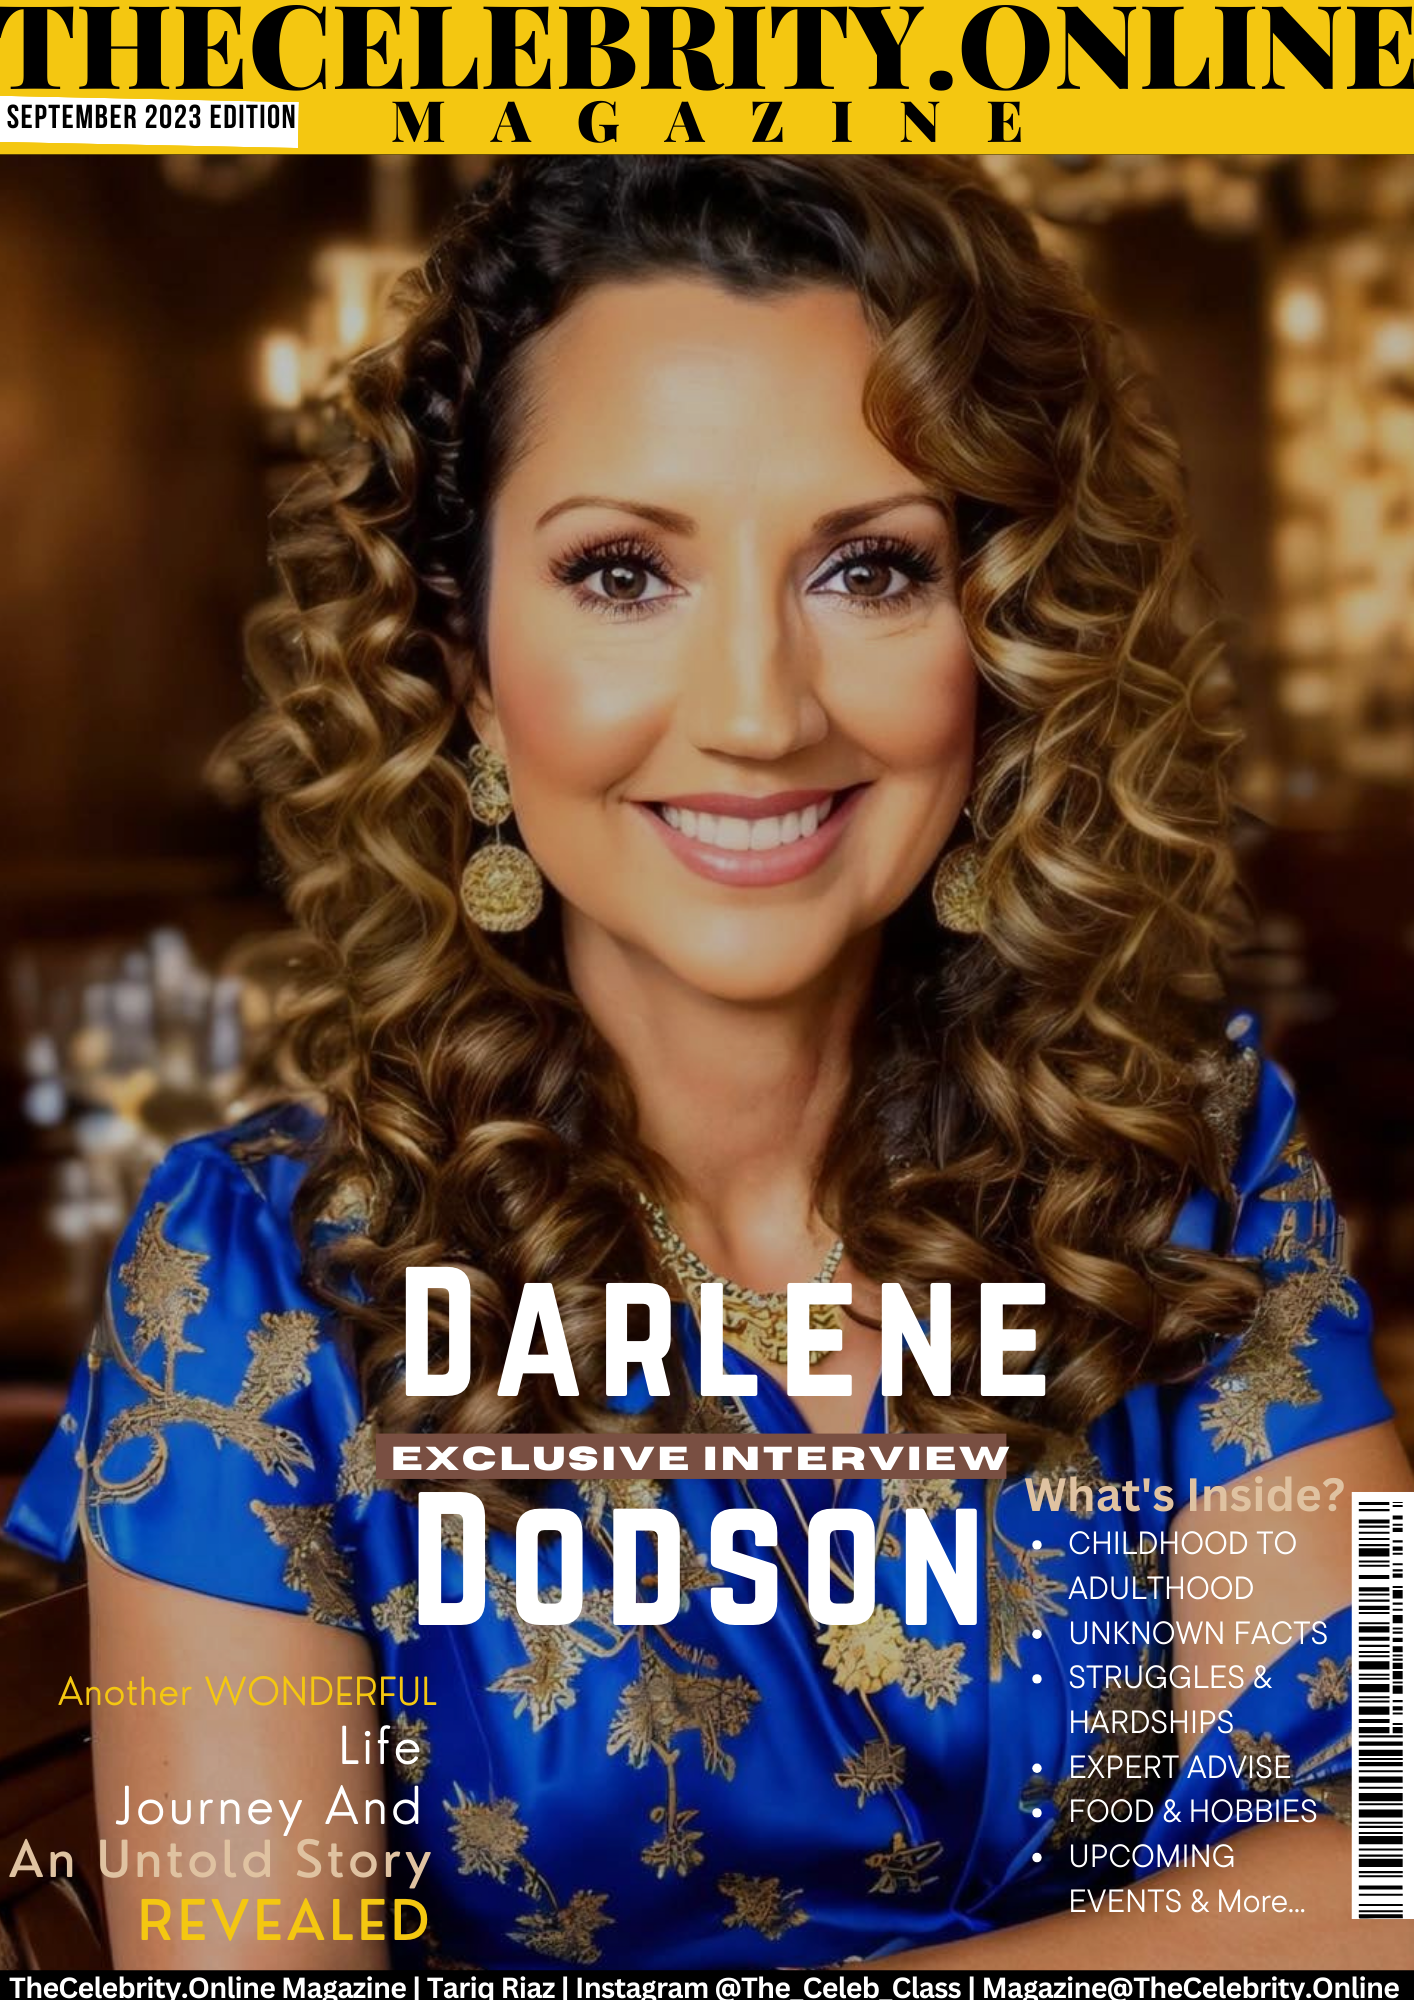 Darlene Dodson Exclusive Interview- ‘You Have All Of The Wisdom Inside Of You To Initiate Your Own Healing’